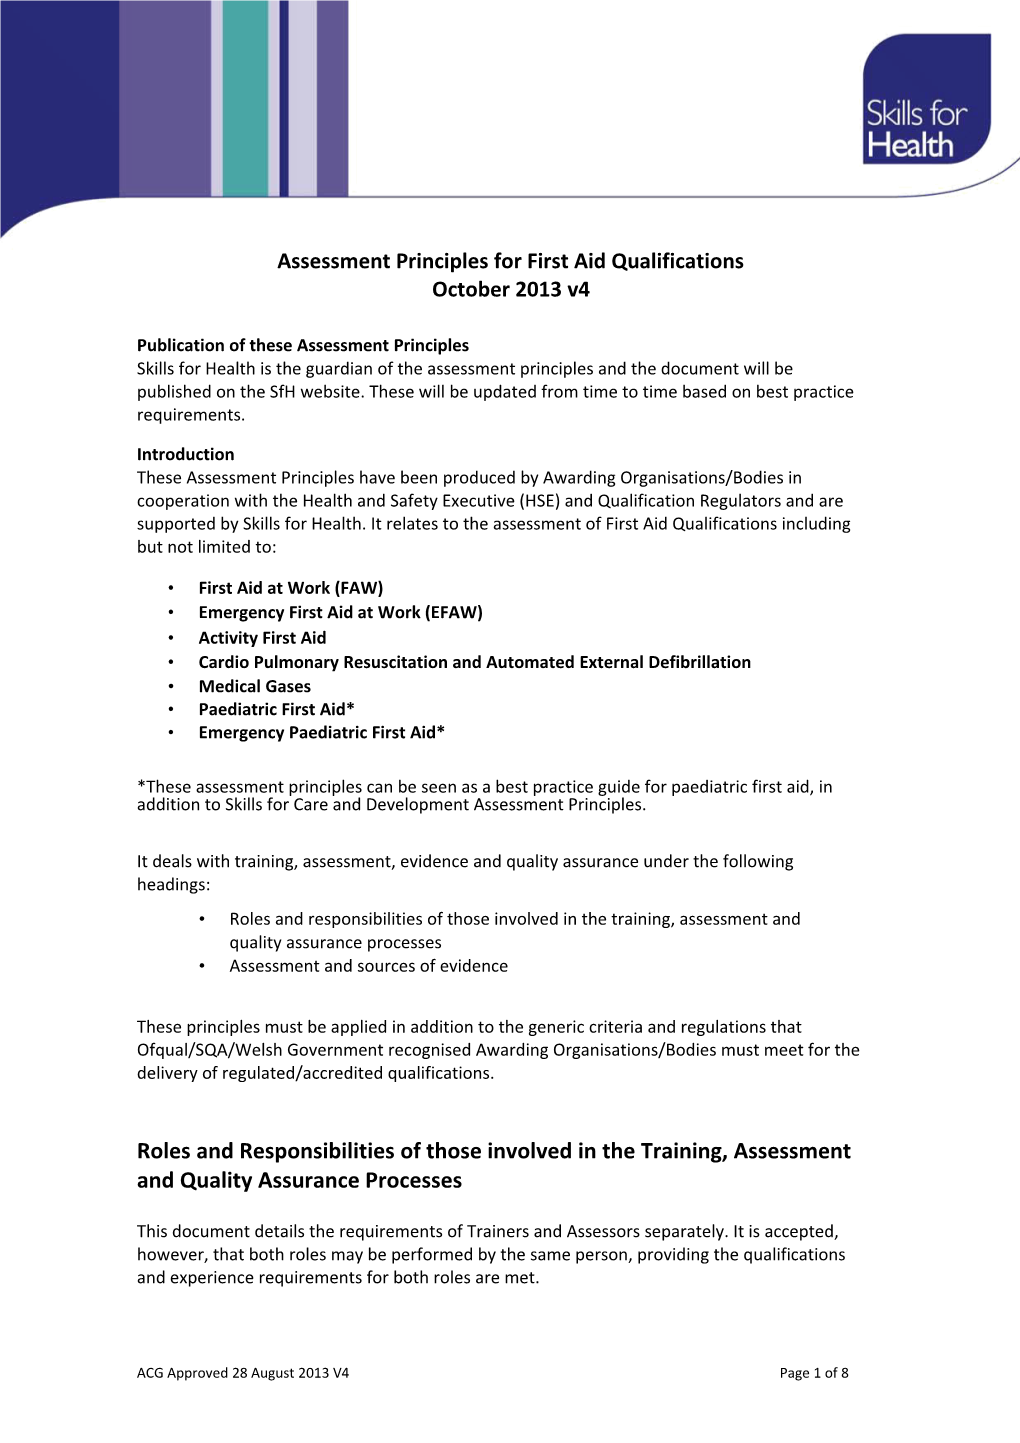 Assessment Principles for First Aid Qualifications